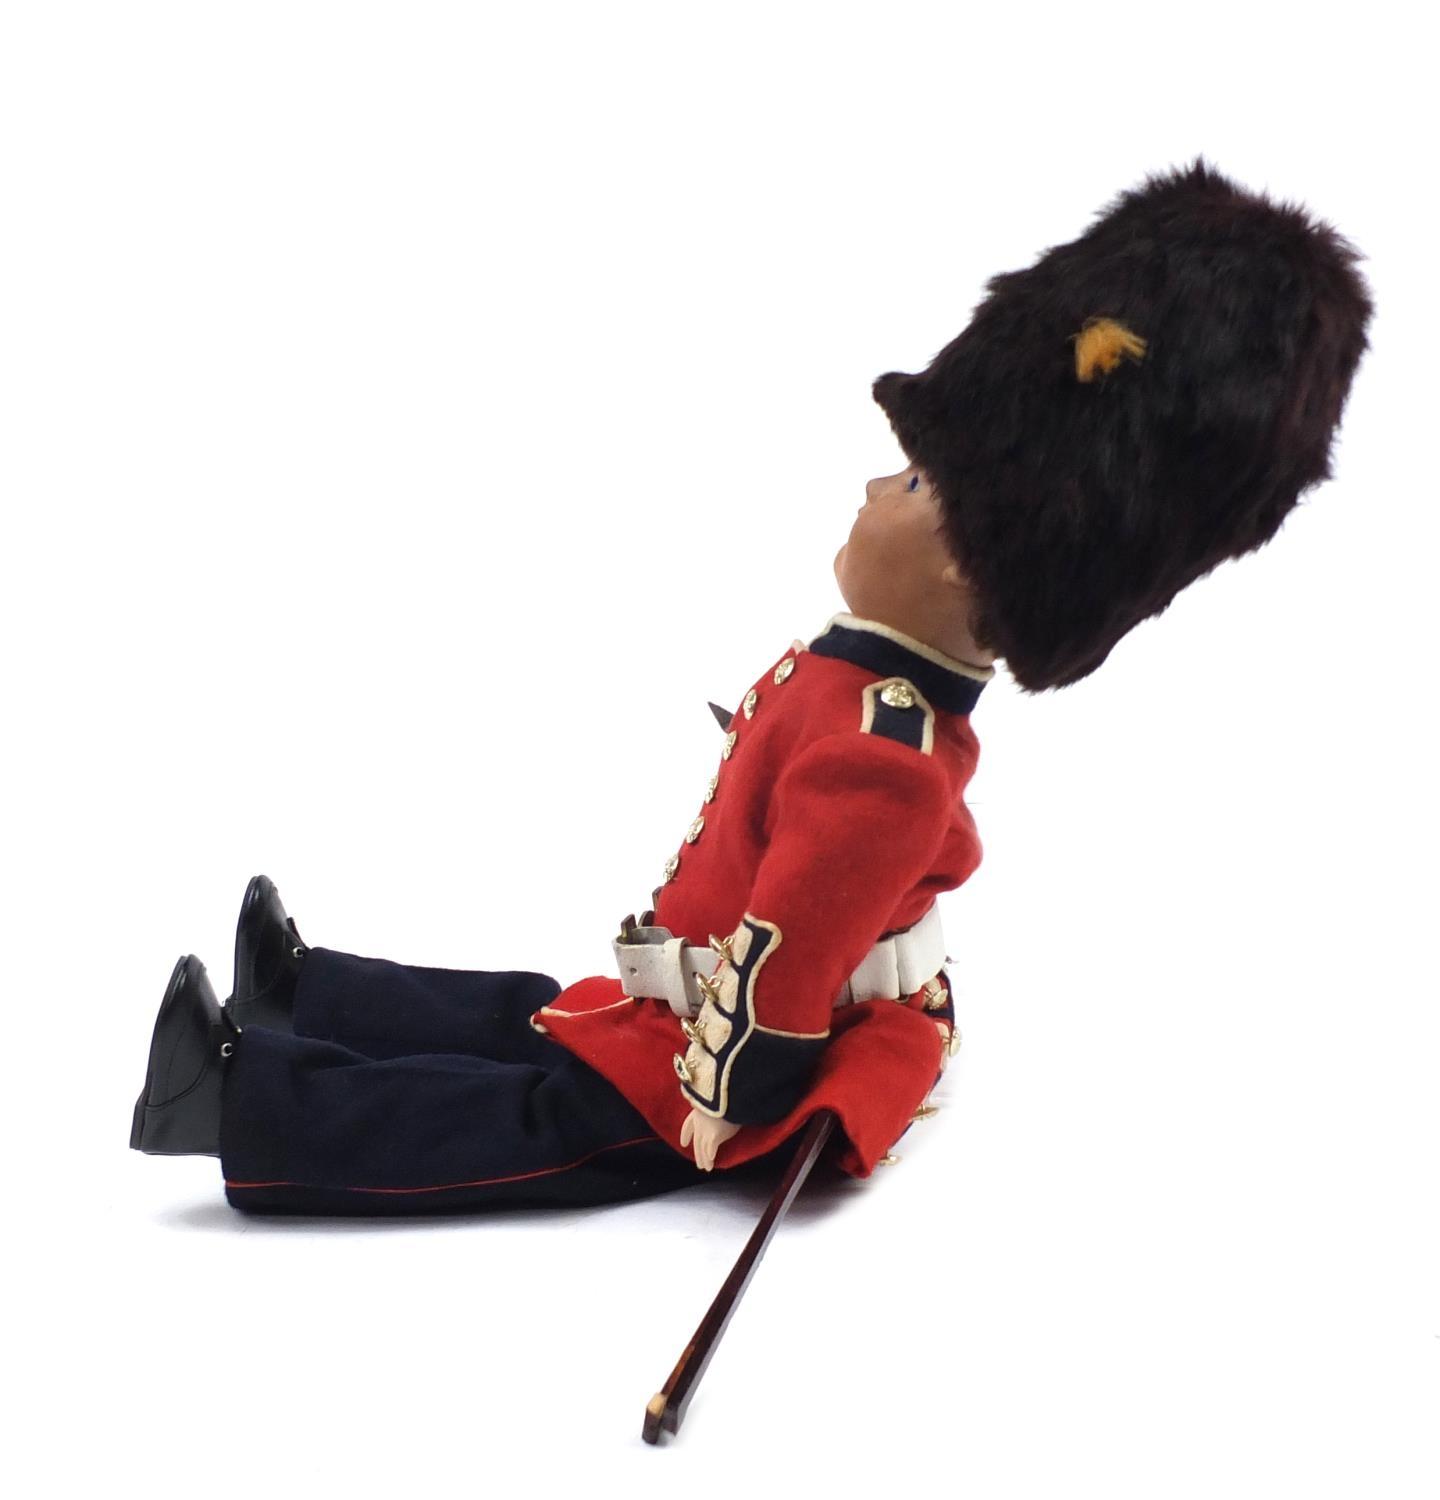 Simon & Halbig bisque headed Beefeater doll, 71cm high - Image 4 of 6